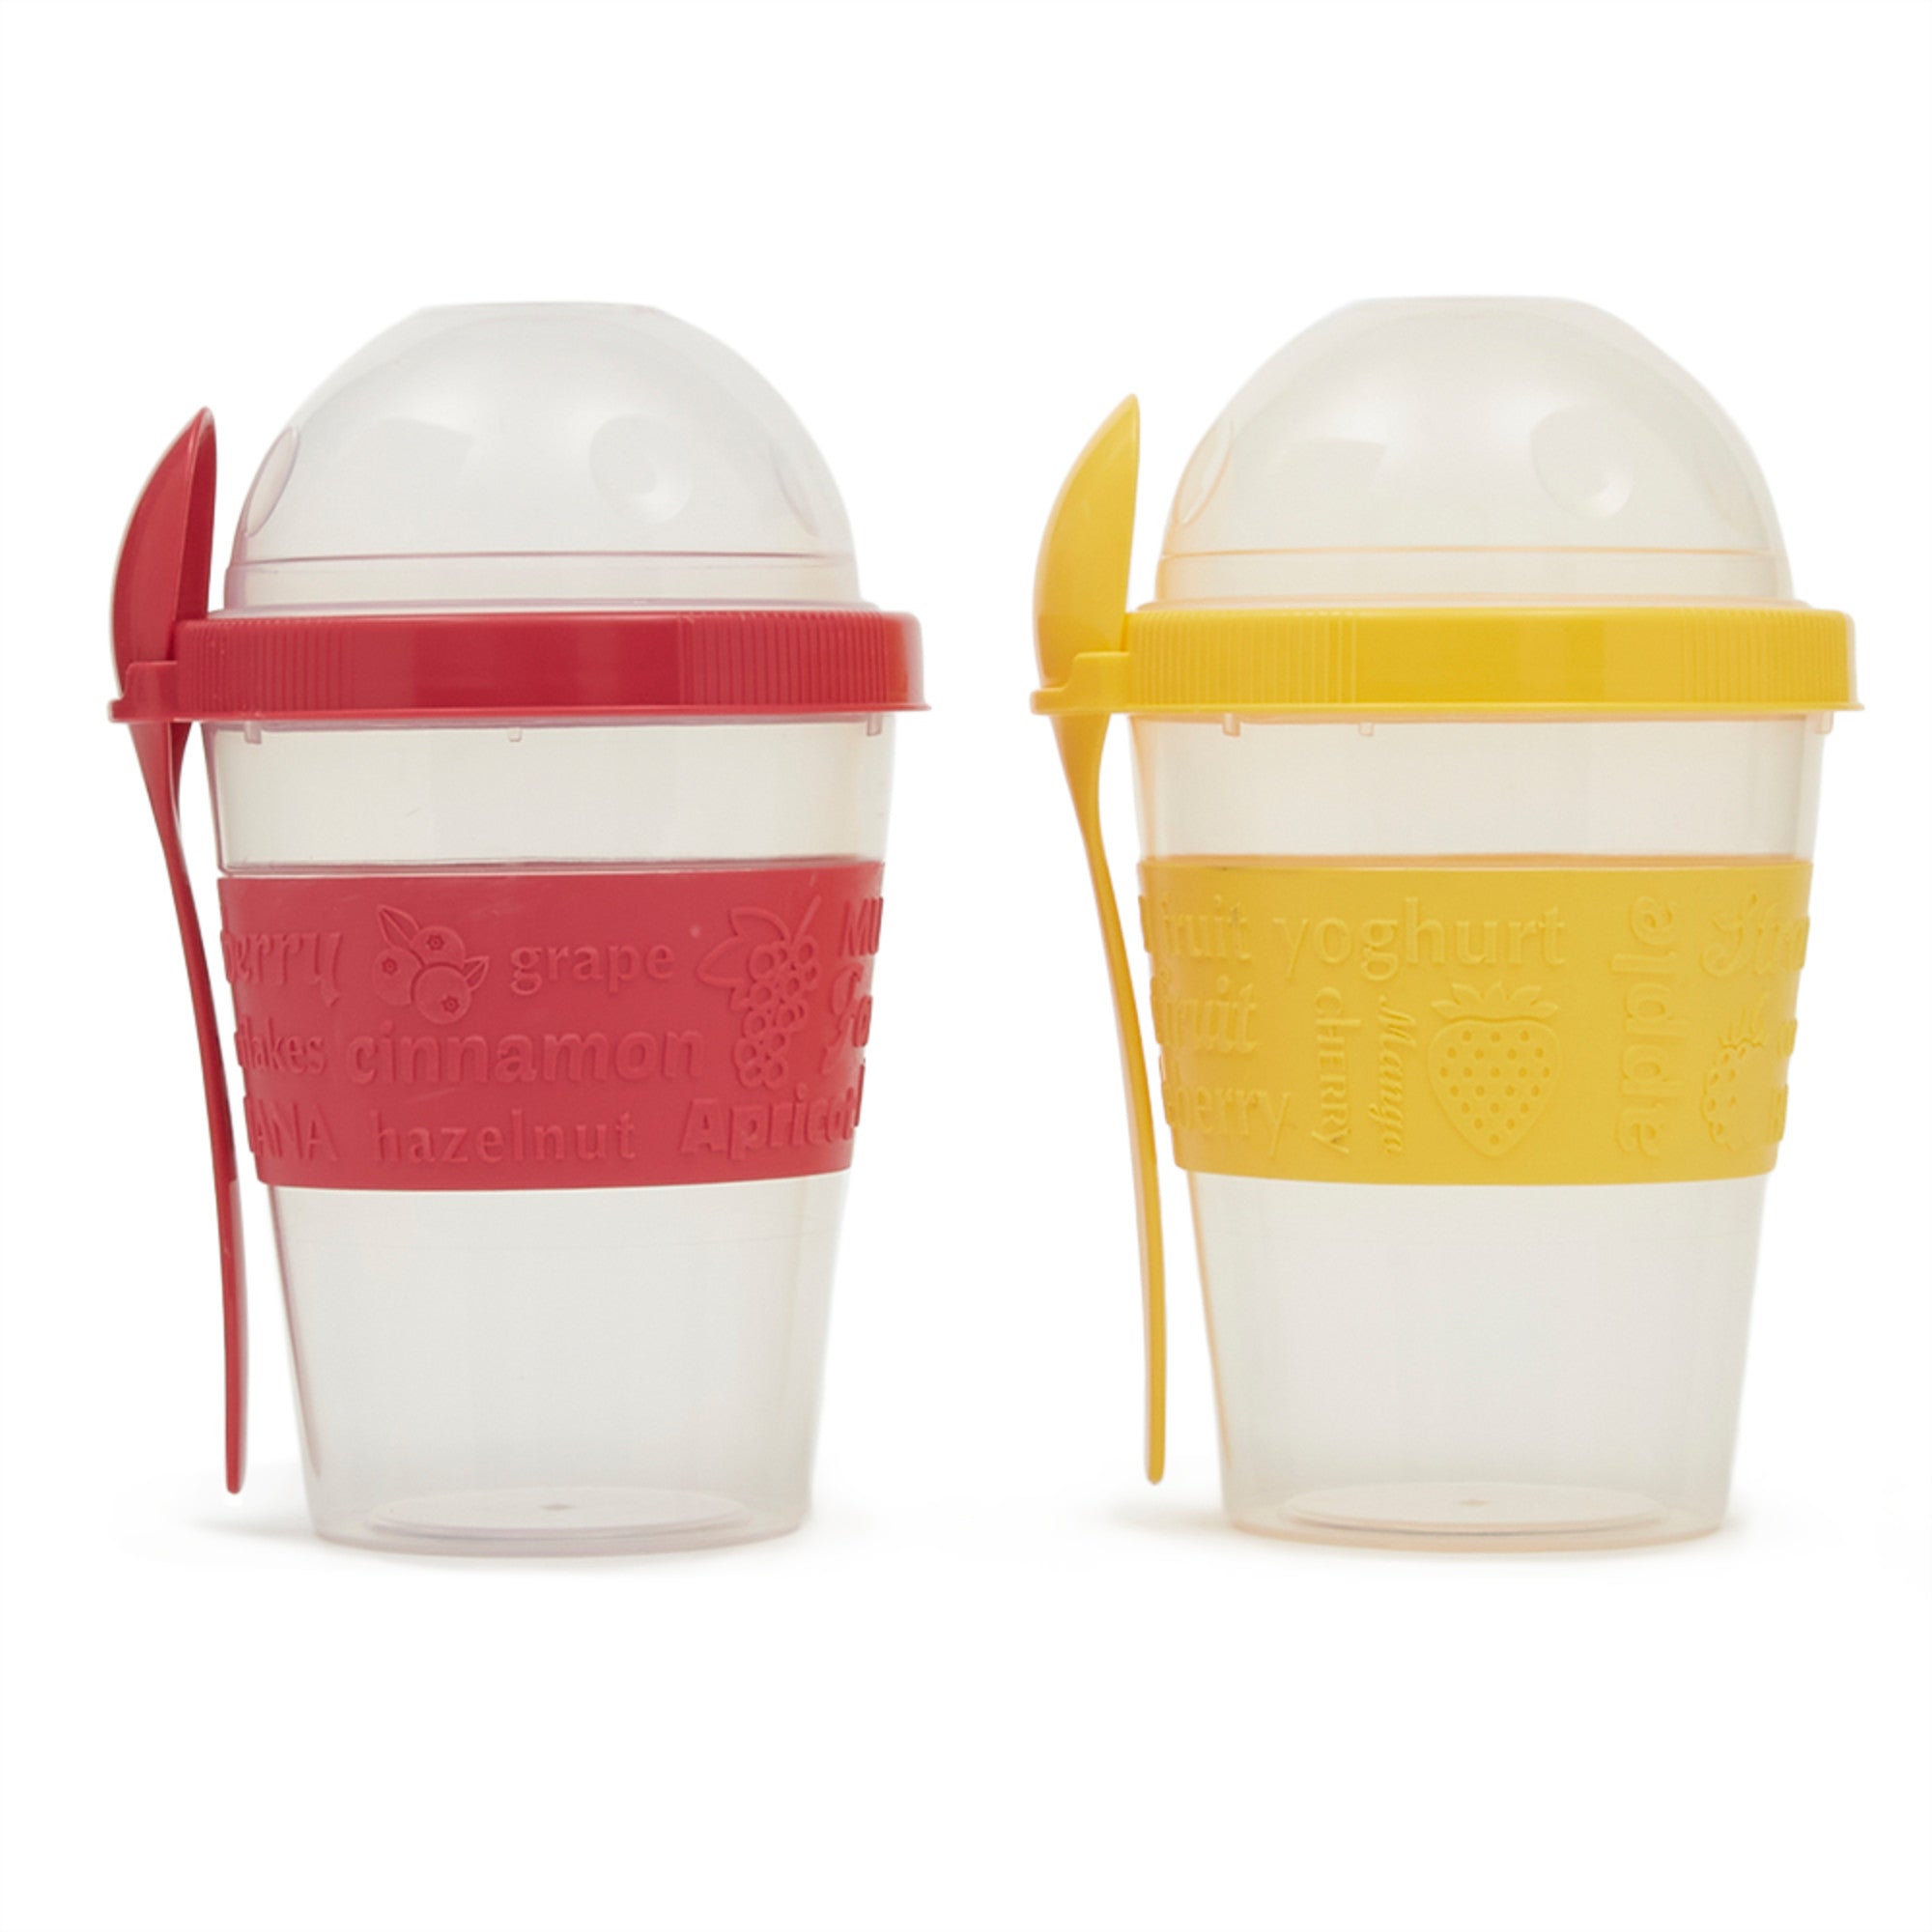 Home Basics Plastic To-Go Cup with Spoon - Assorted Colors